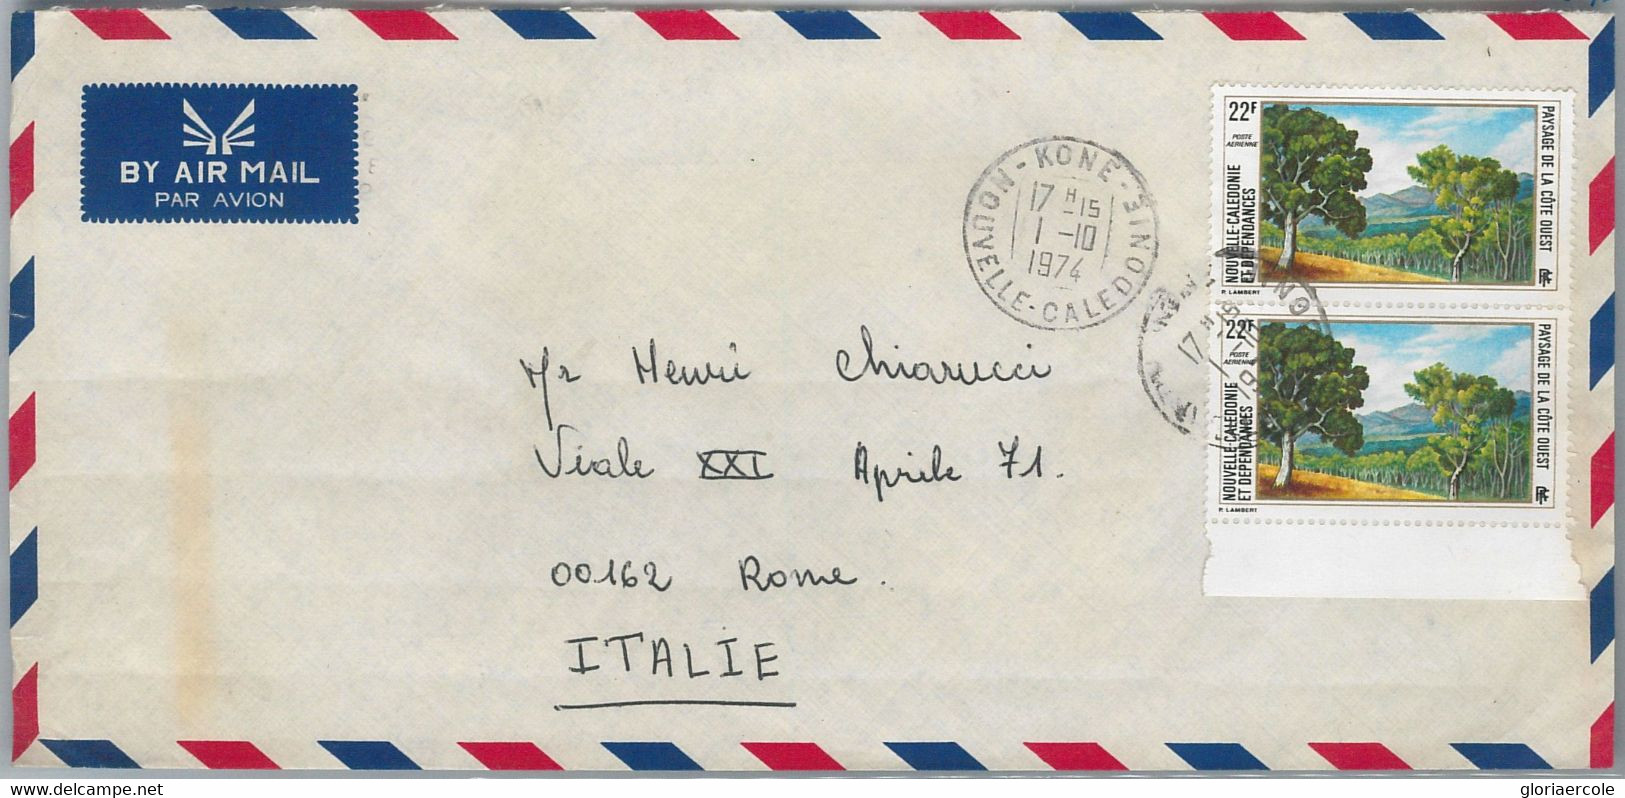 57369 - NOUVELLE CALEDONIE - POSTAL HISTORY - Airmail Cover To ITALY  1974 - Brieven En Documenten